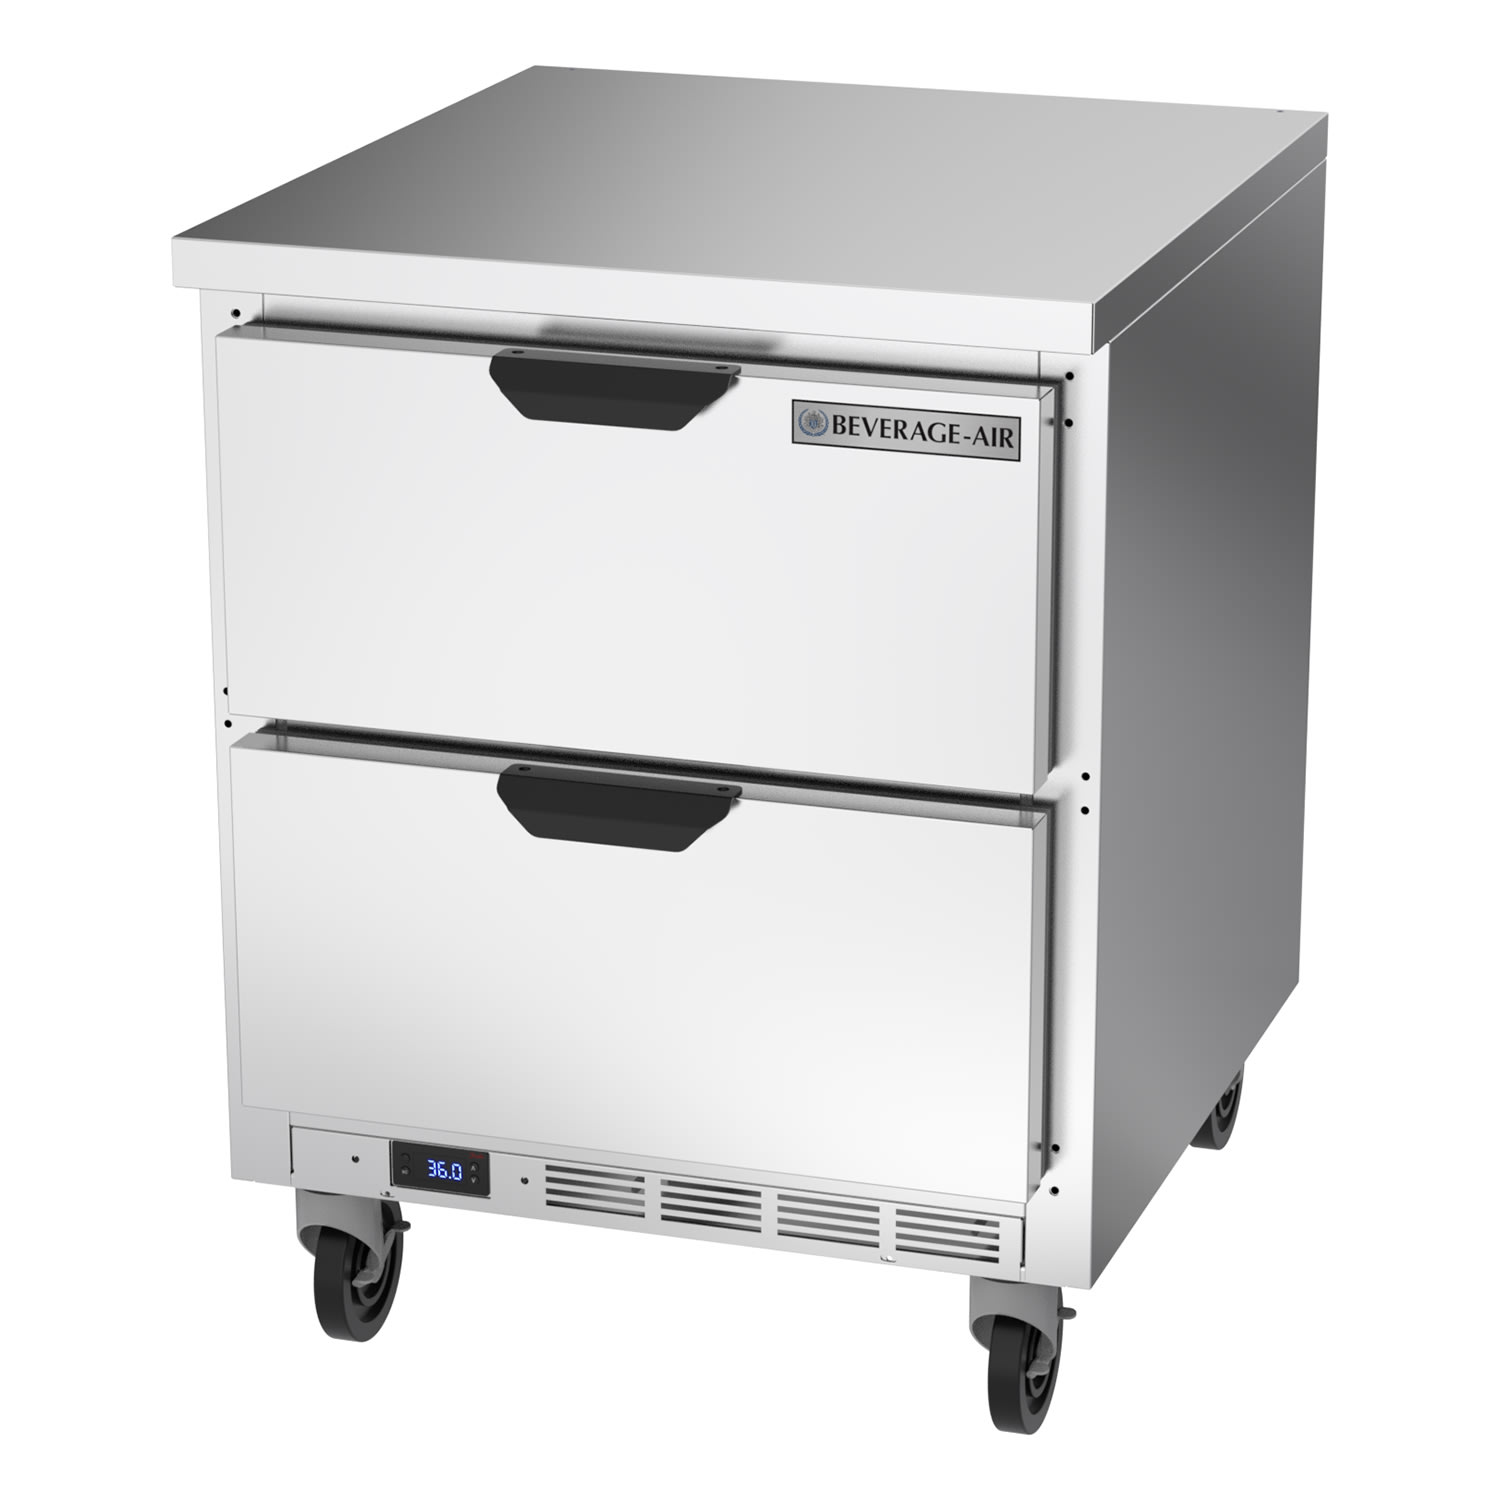 Beverage-Air UCF27AHC-23 27 Low Profile Undercounter Freezer